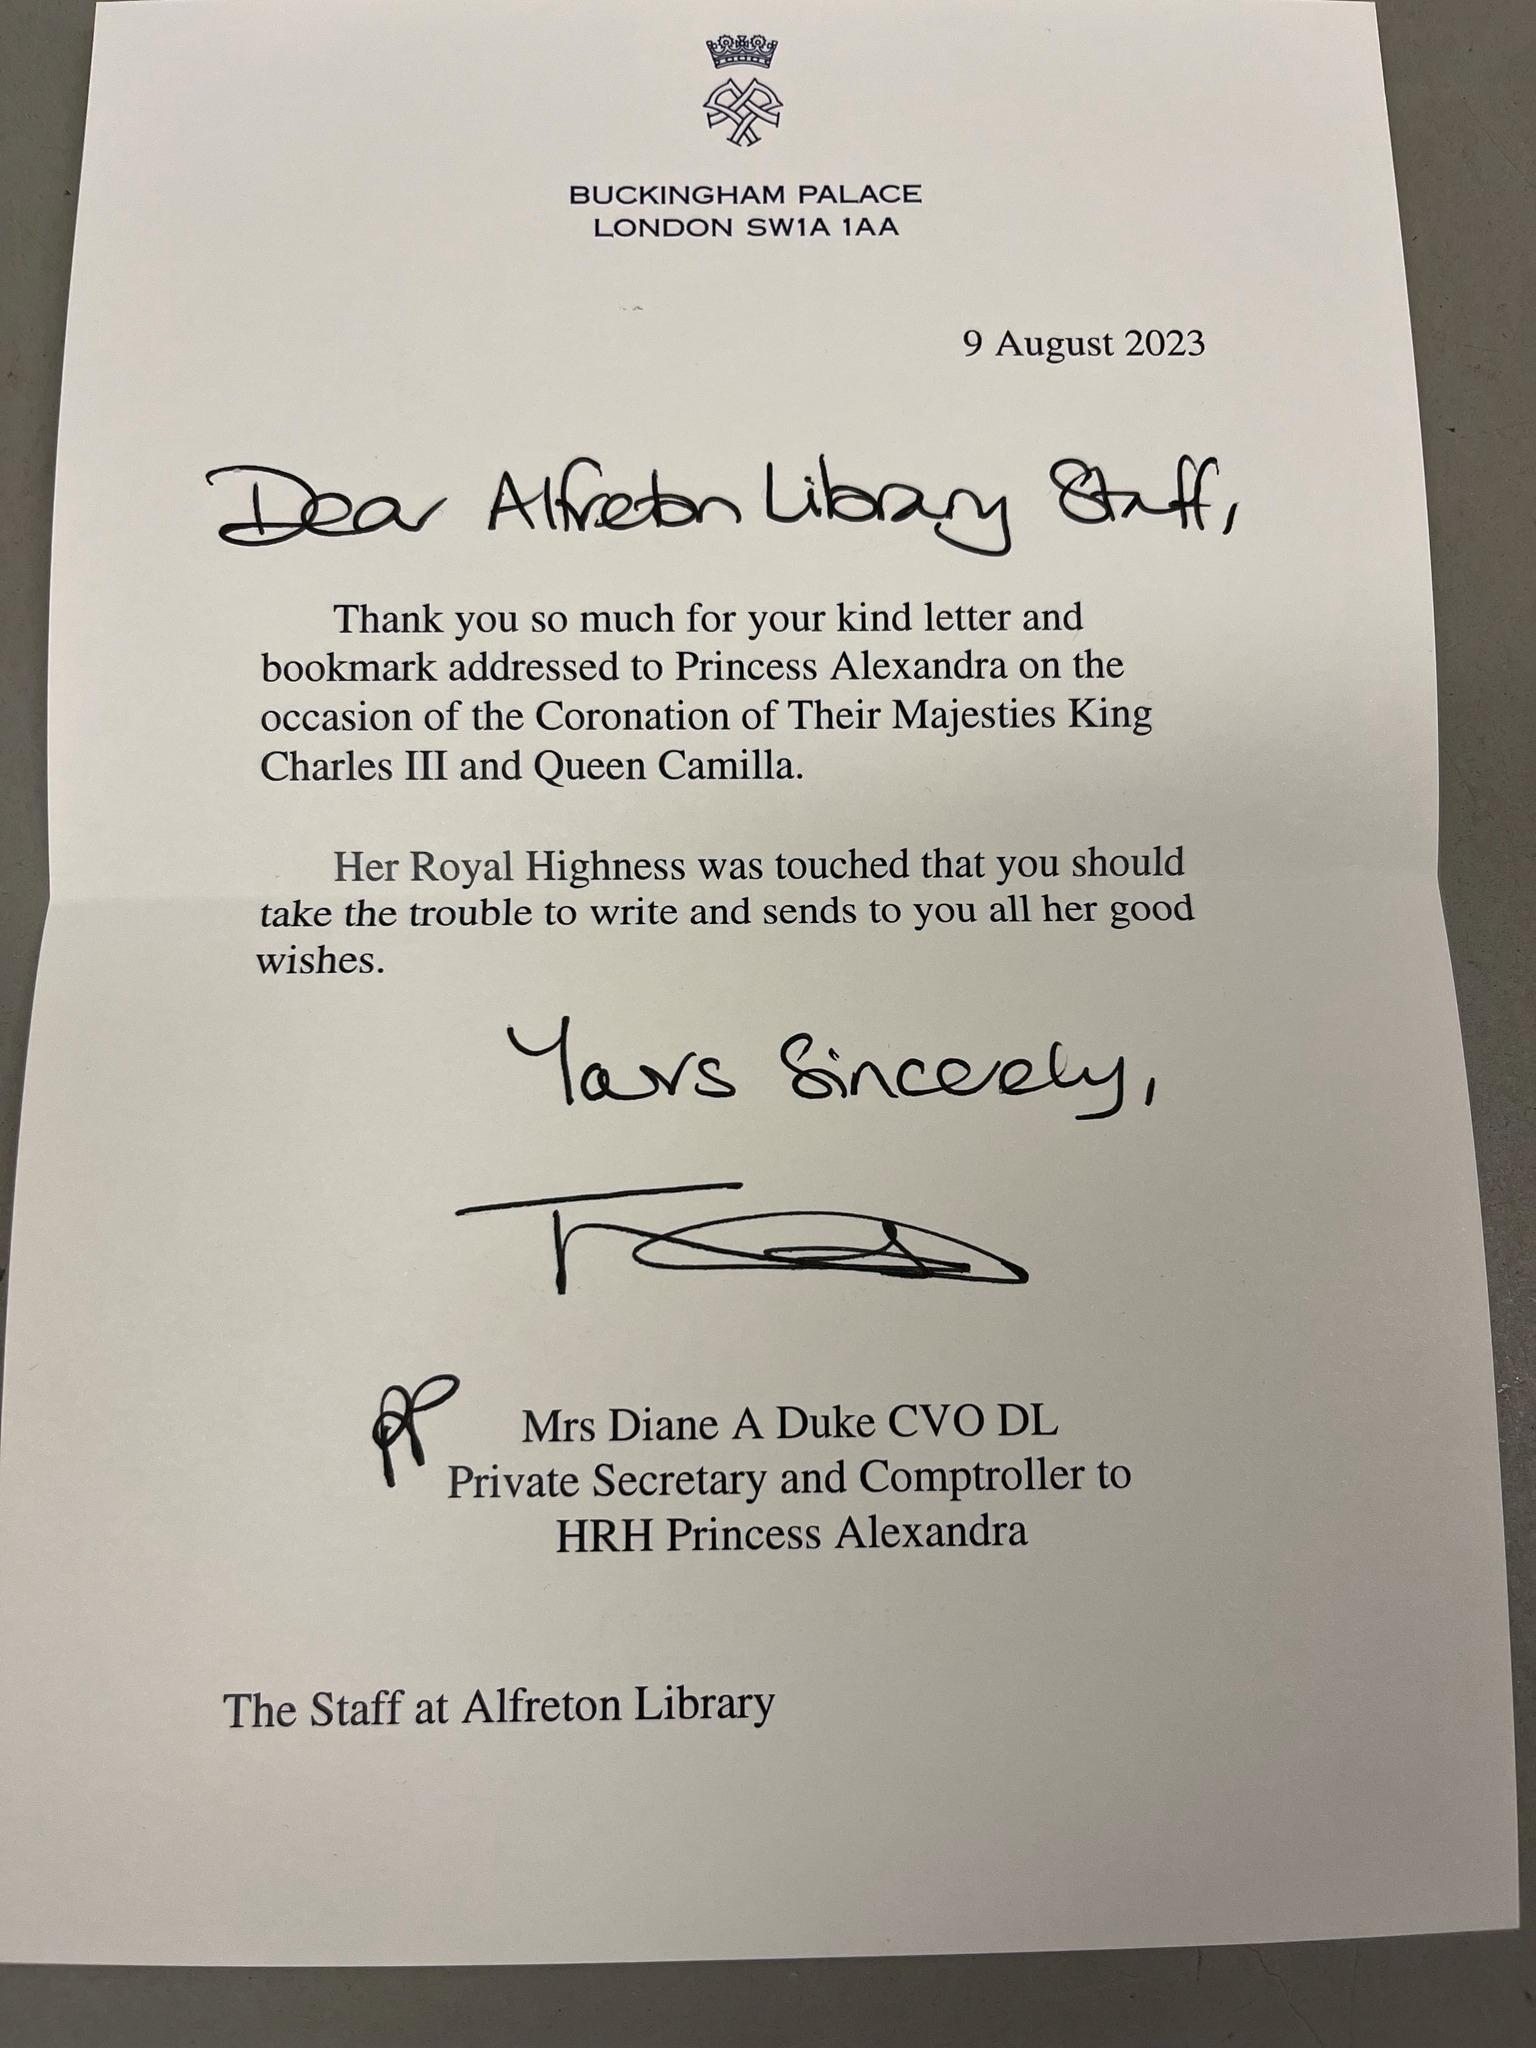 Staff at Alfreton Library received a letter from Buckingham Palace